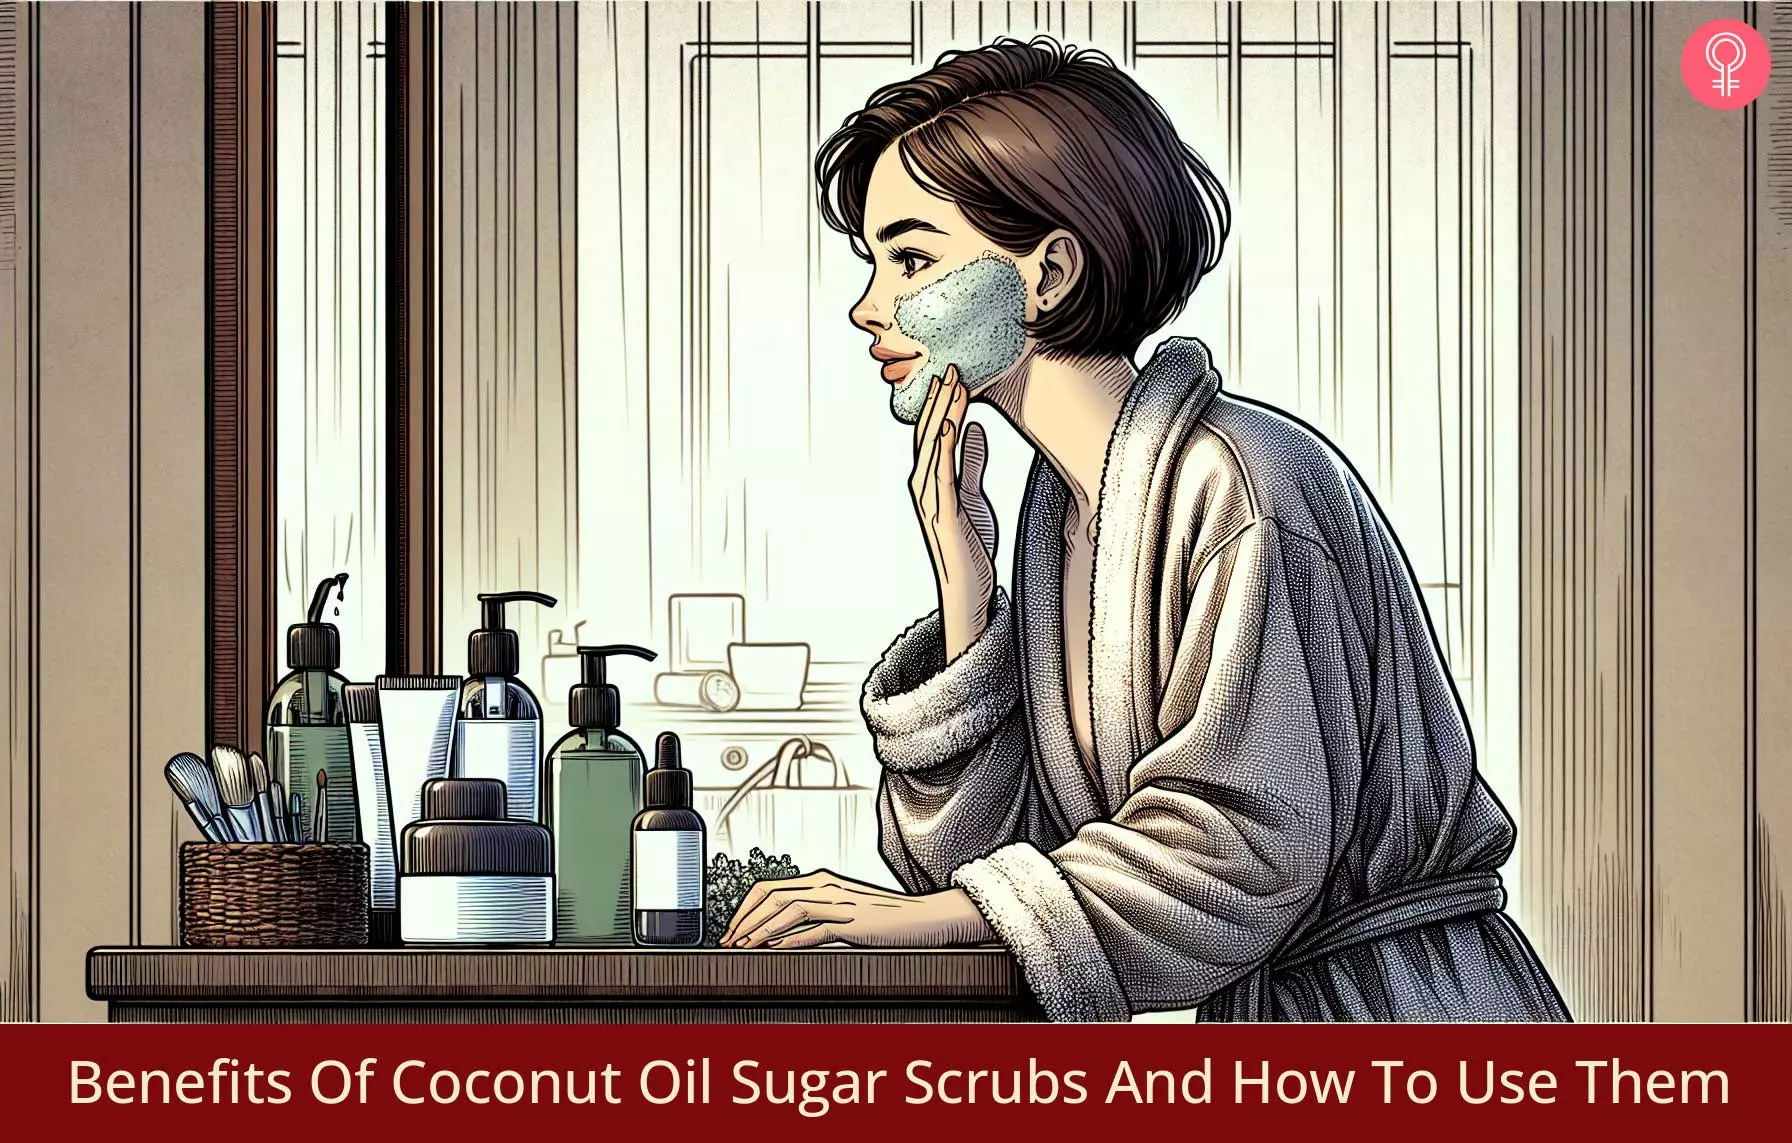 Top 5 Benefits Of Coconut Oil Sugar Scrubs And How To Use Them